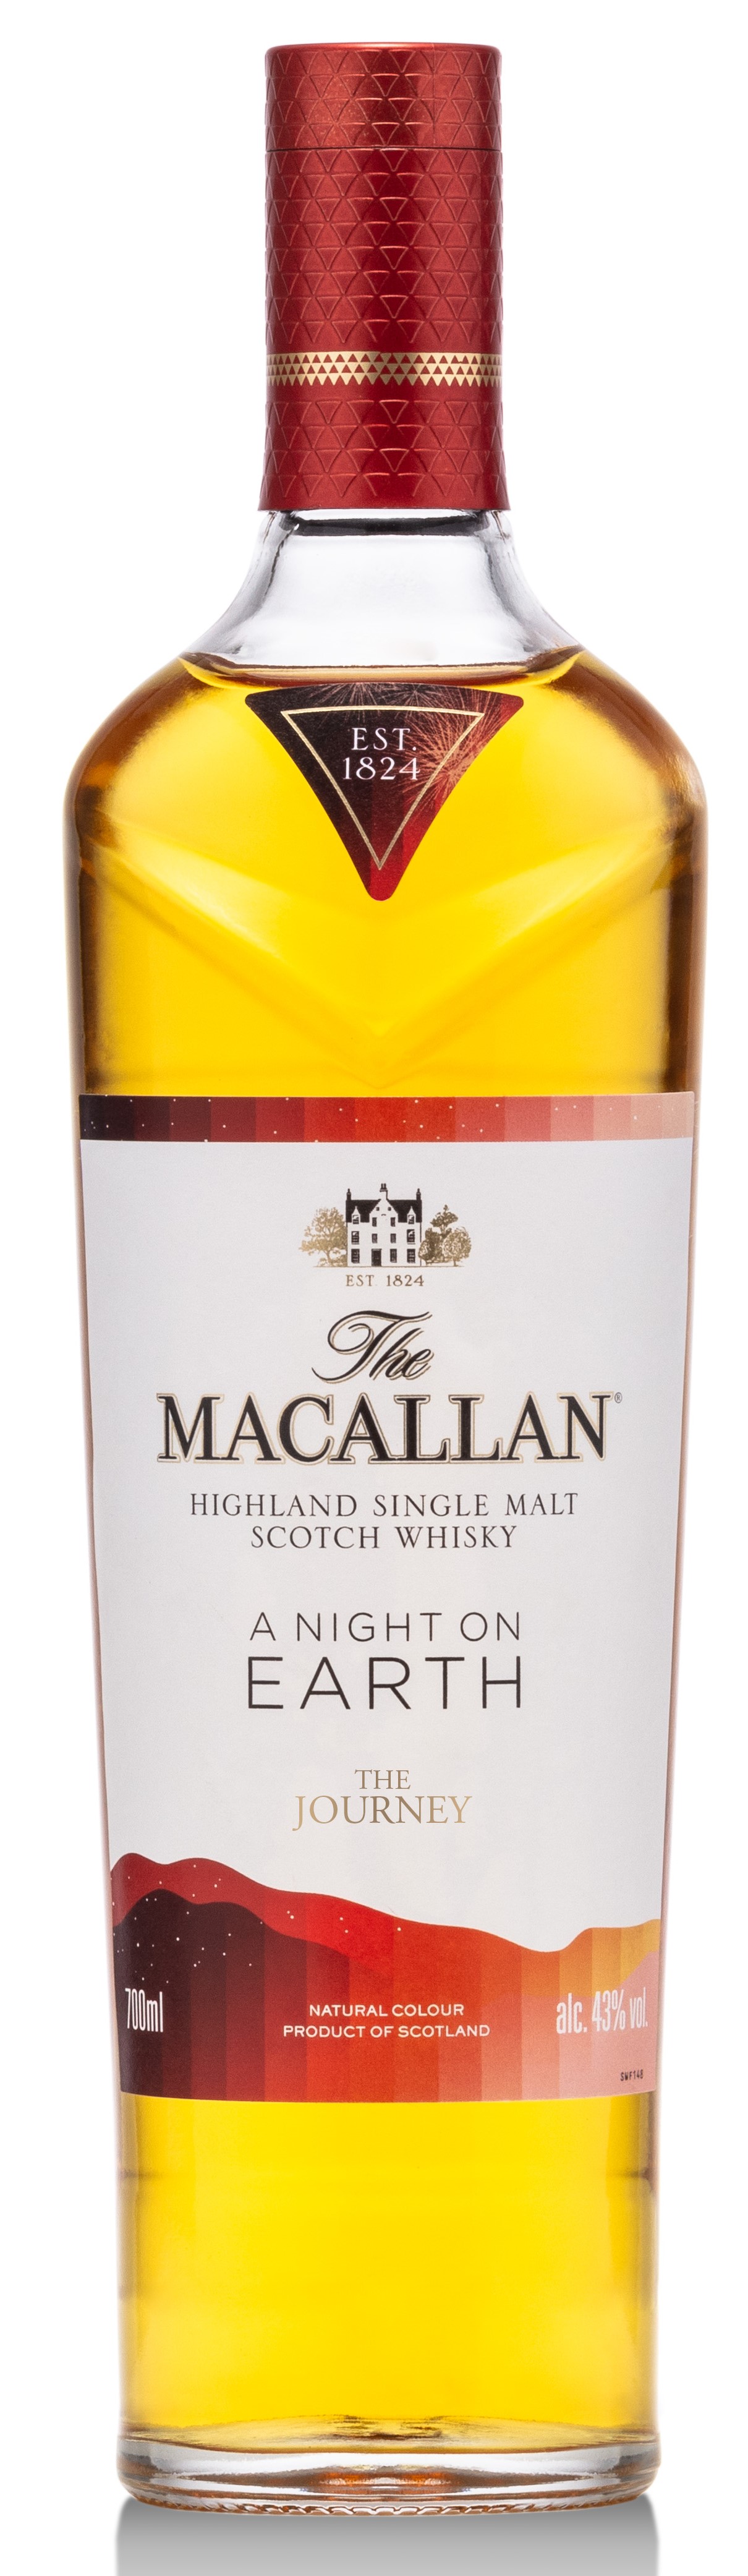 MACALLAN A NIGHT ON EARTH WHISKY 43% 70CL